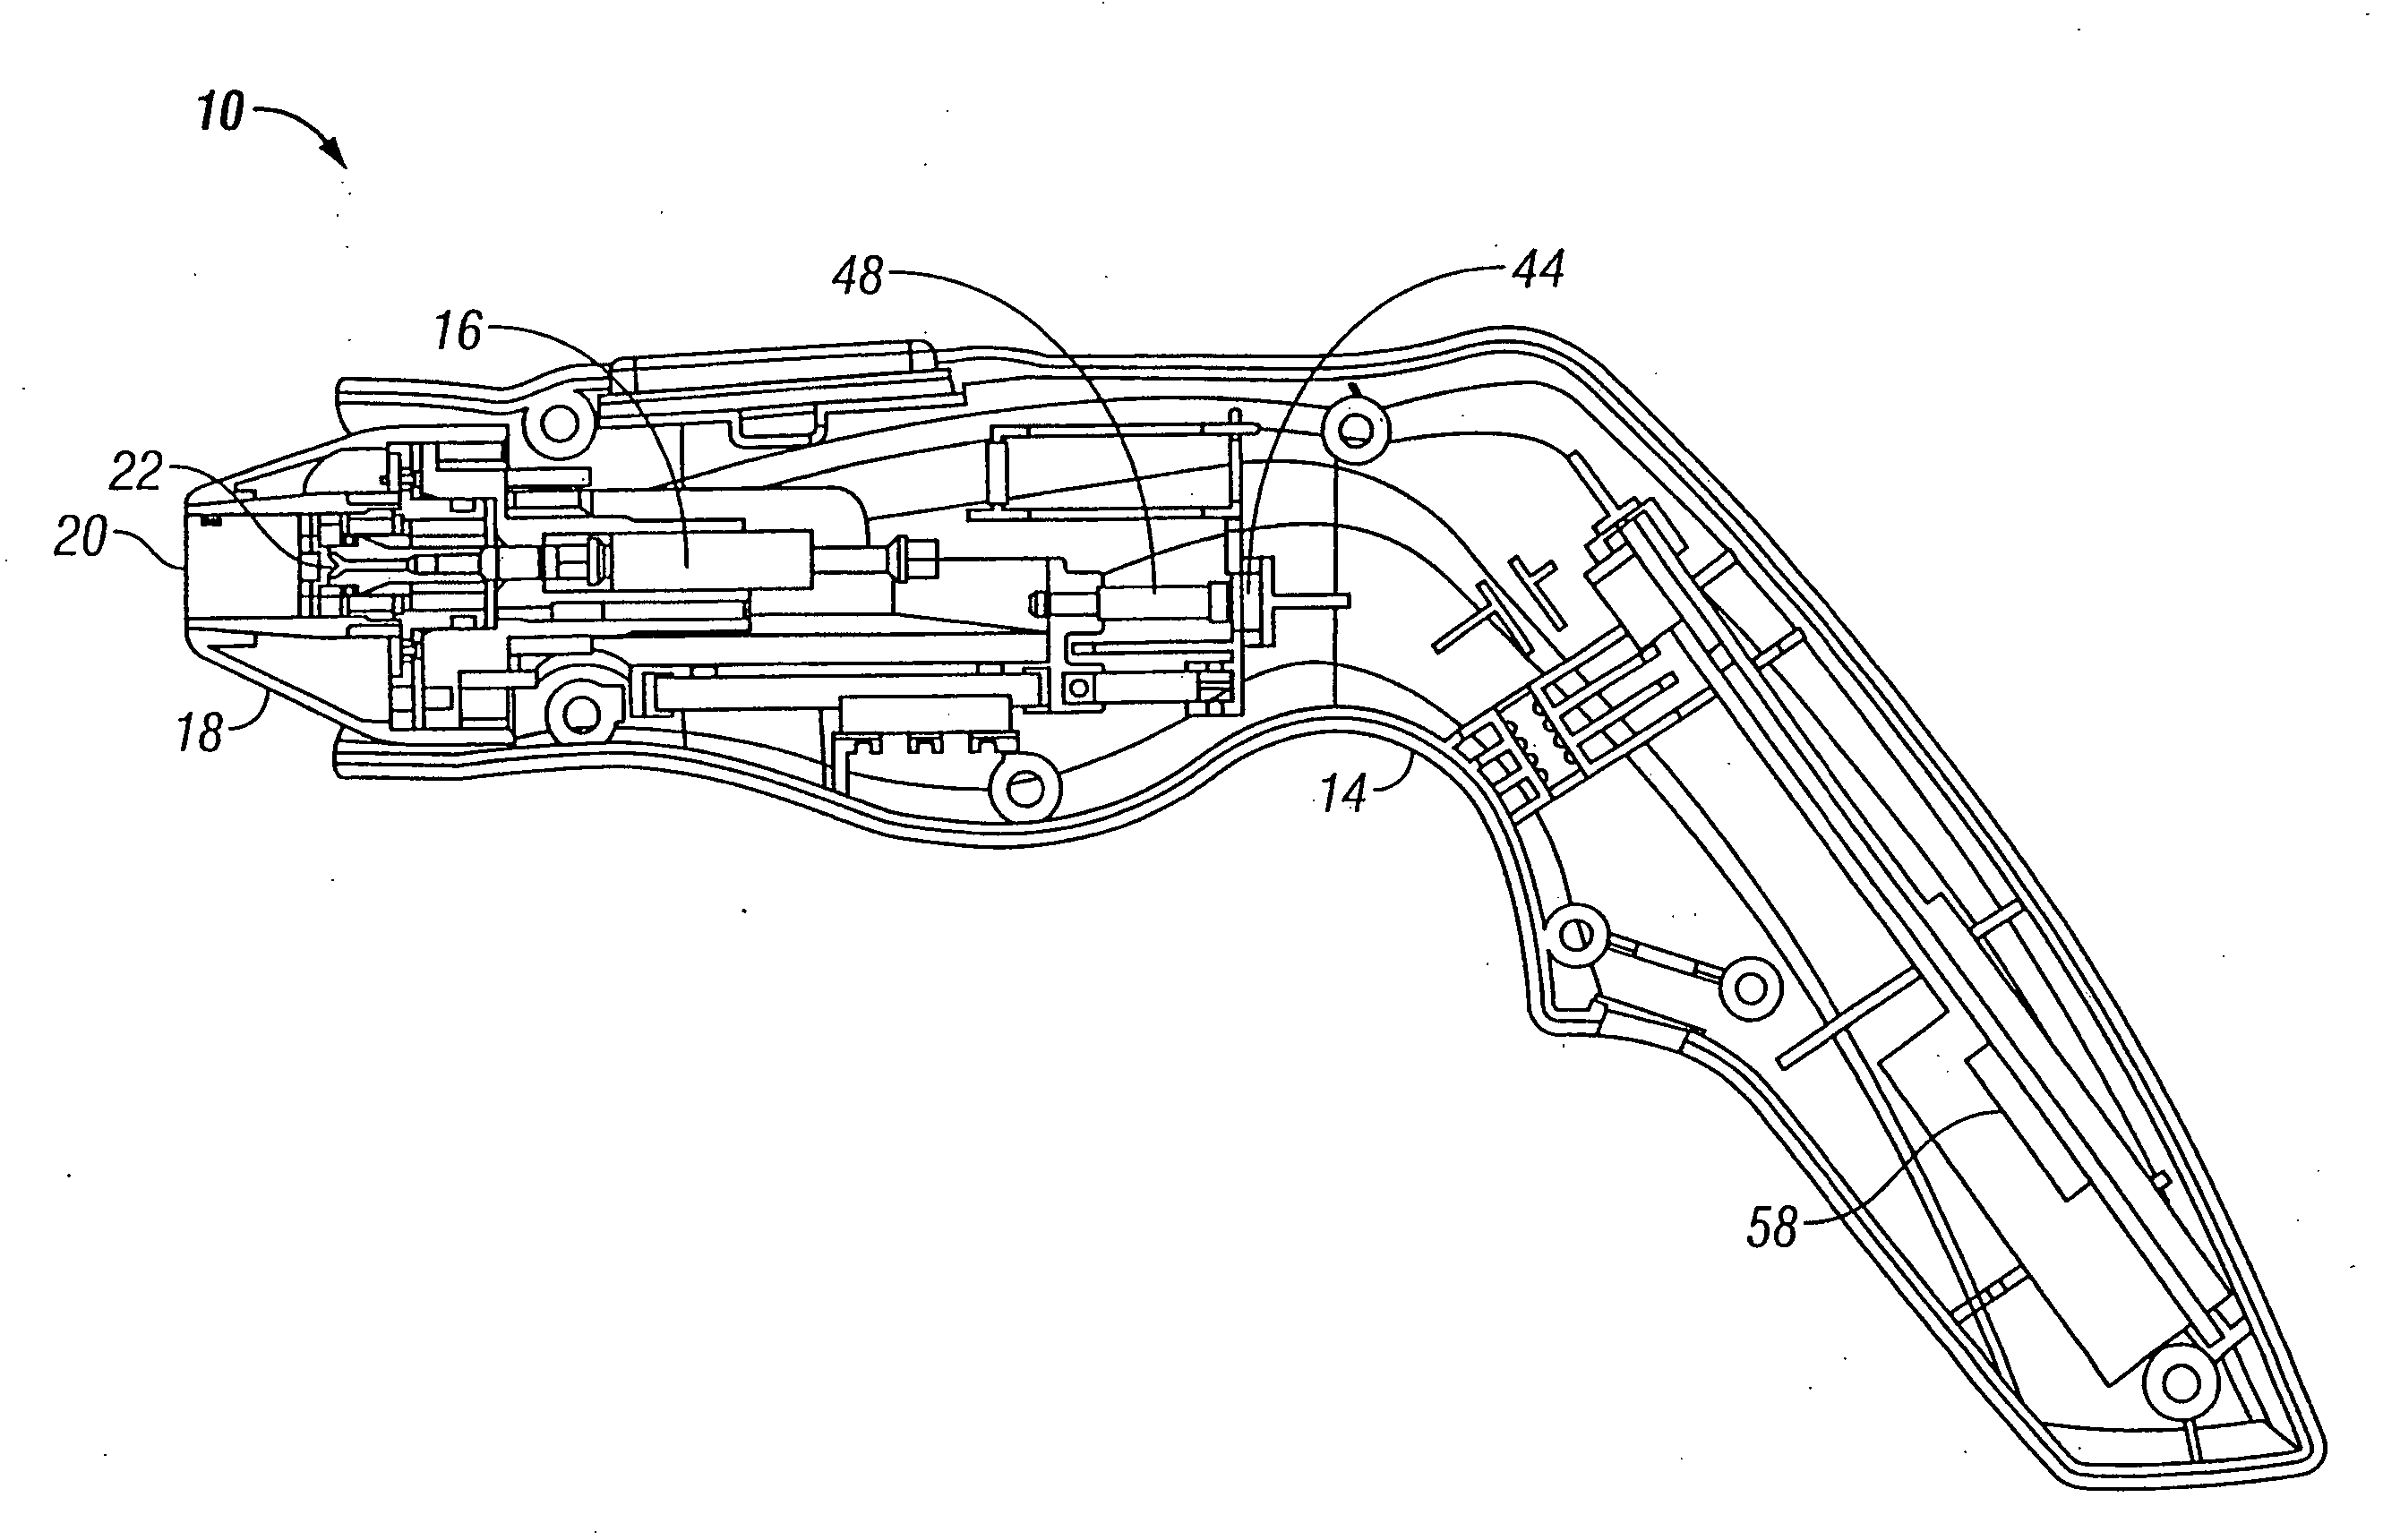 Handpiece with RF electrode and non-volative memory